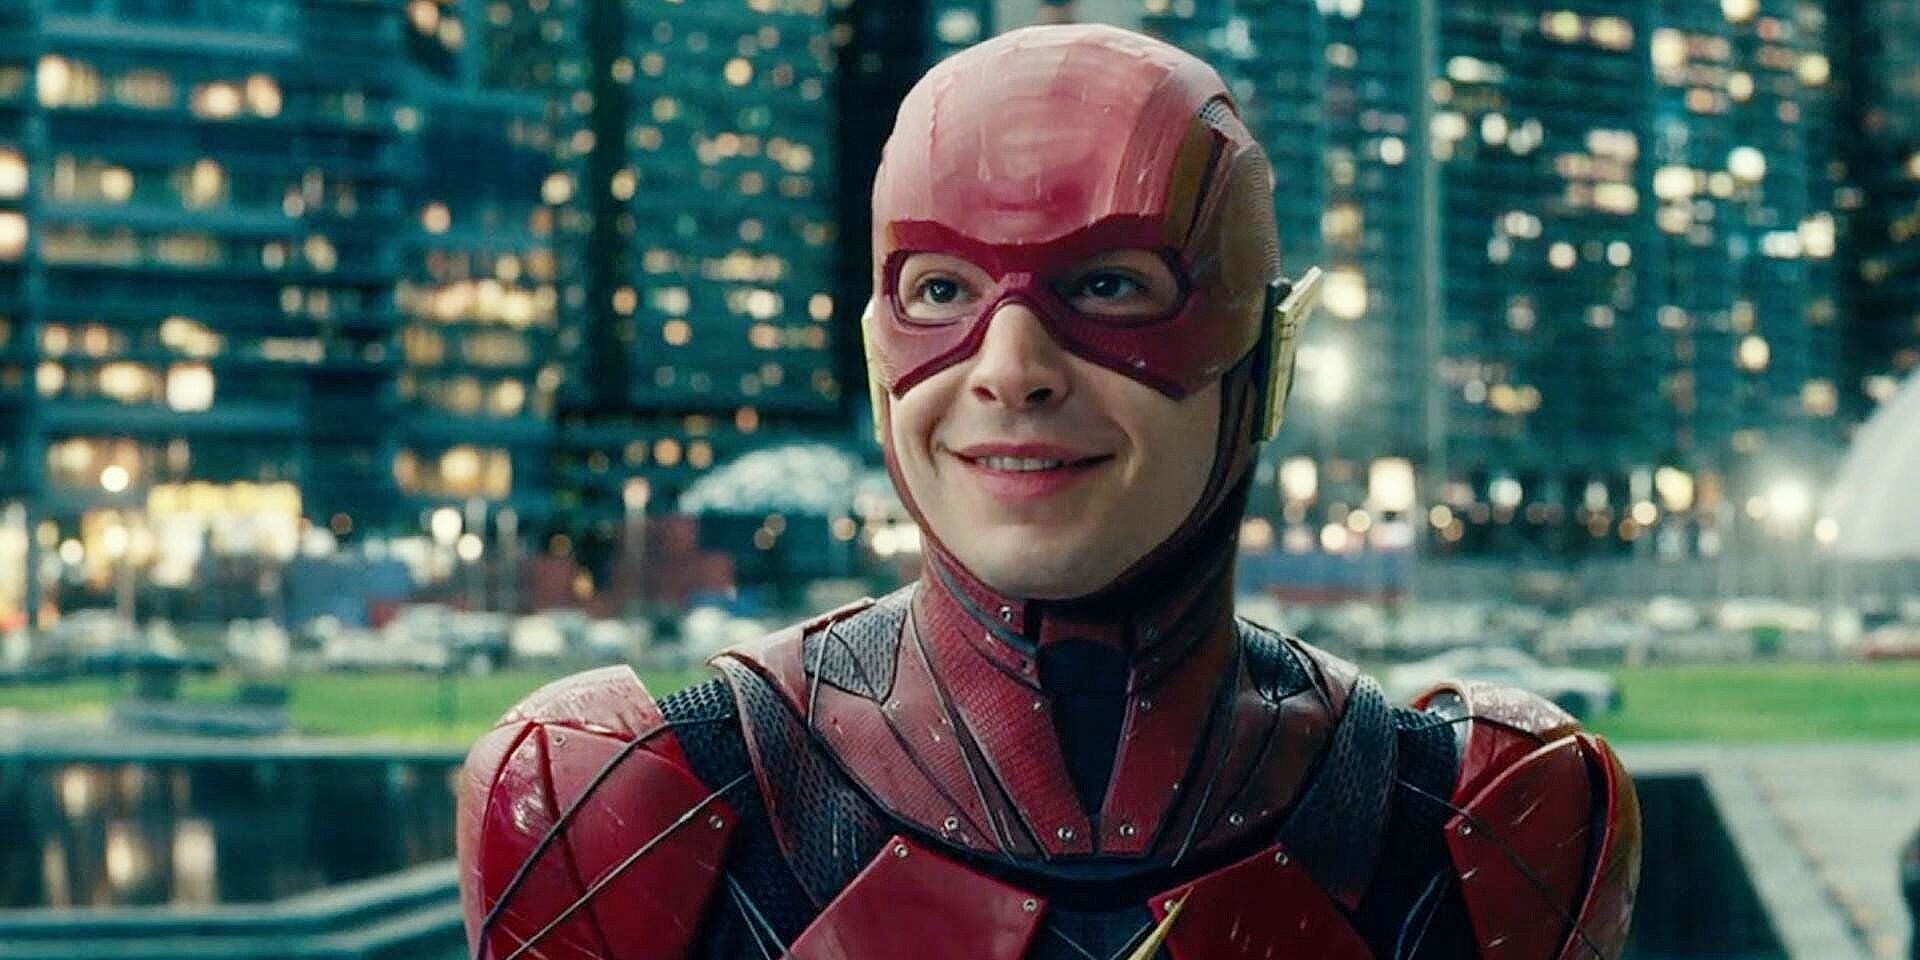 The Flash smiles at a resurrected Superman in Justice League